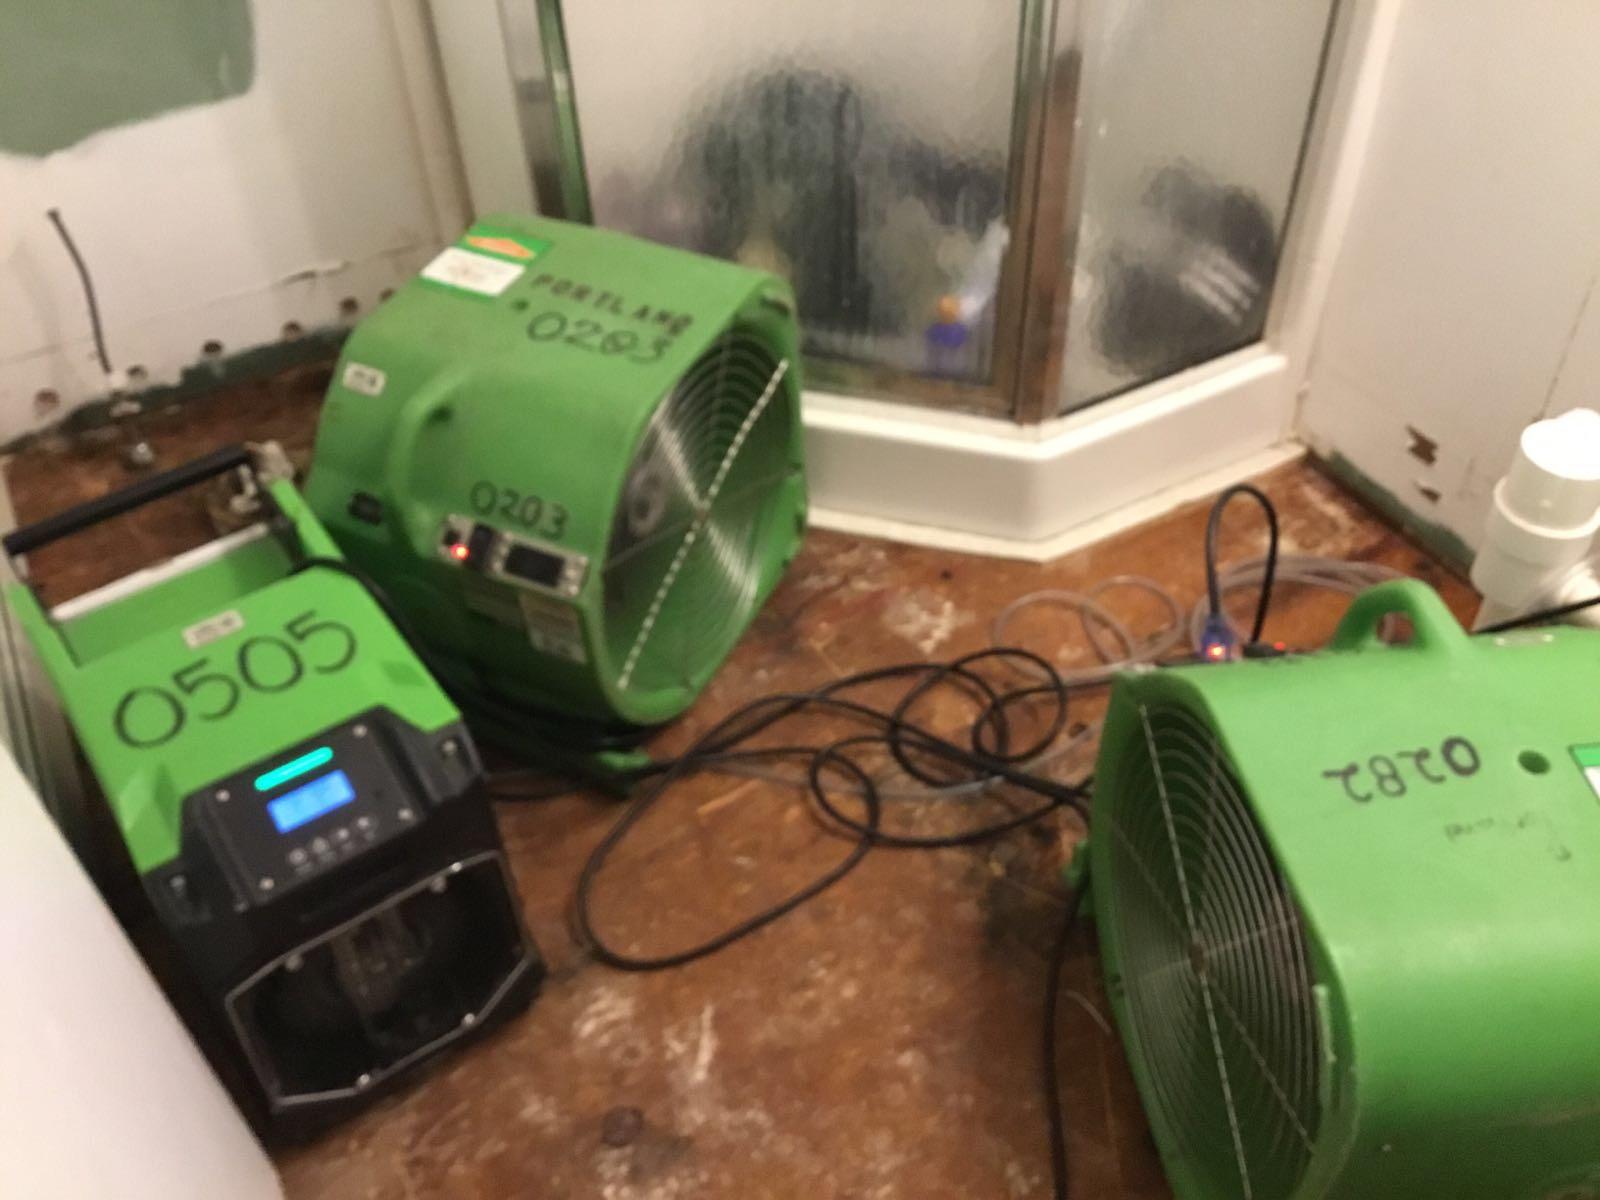 Residential water damage restoration is what our SERVPRO of Portland team is here for.